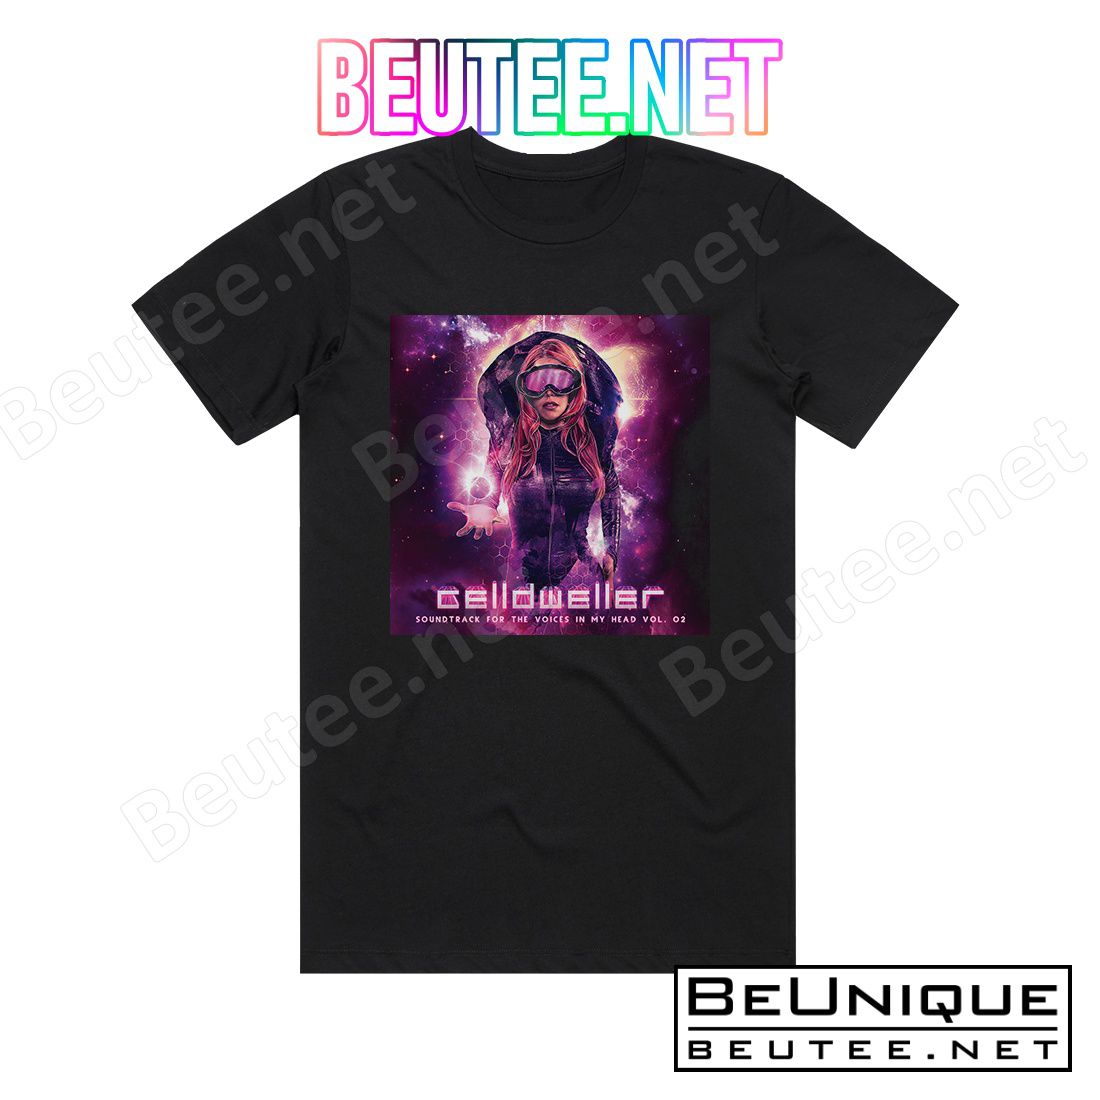 Celldweller Soundtrack For The Voices In My Head Vol 2 Album Cover T-Shirt